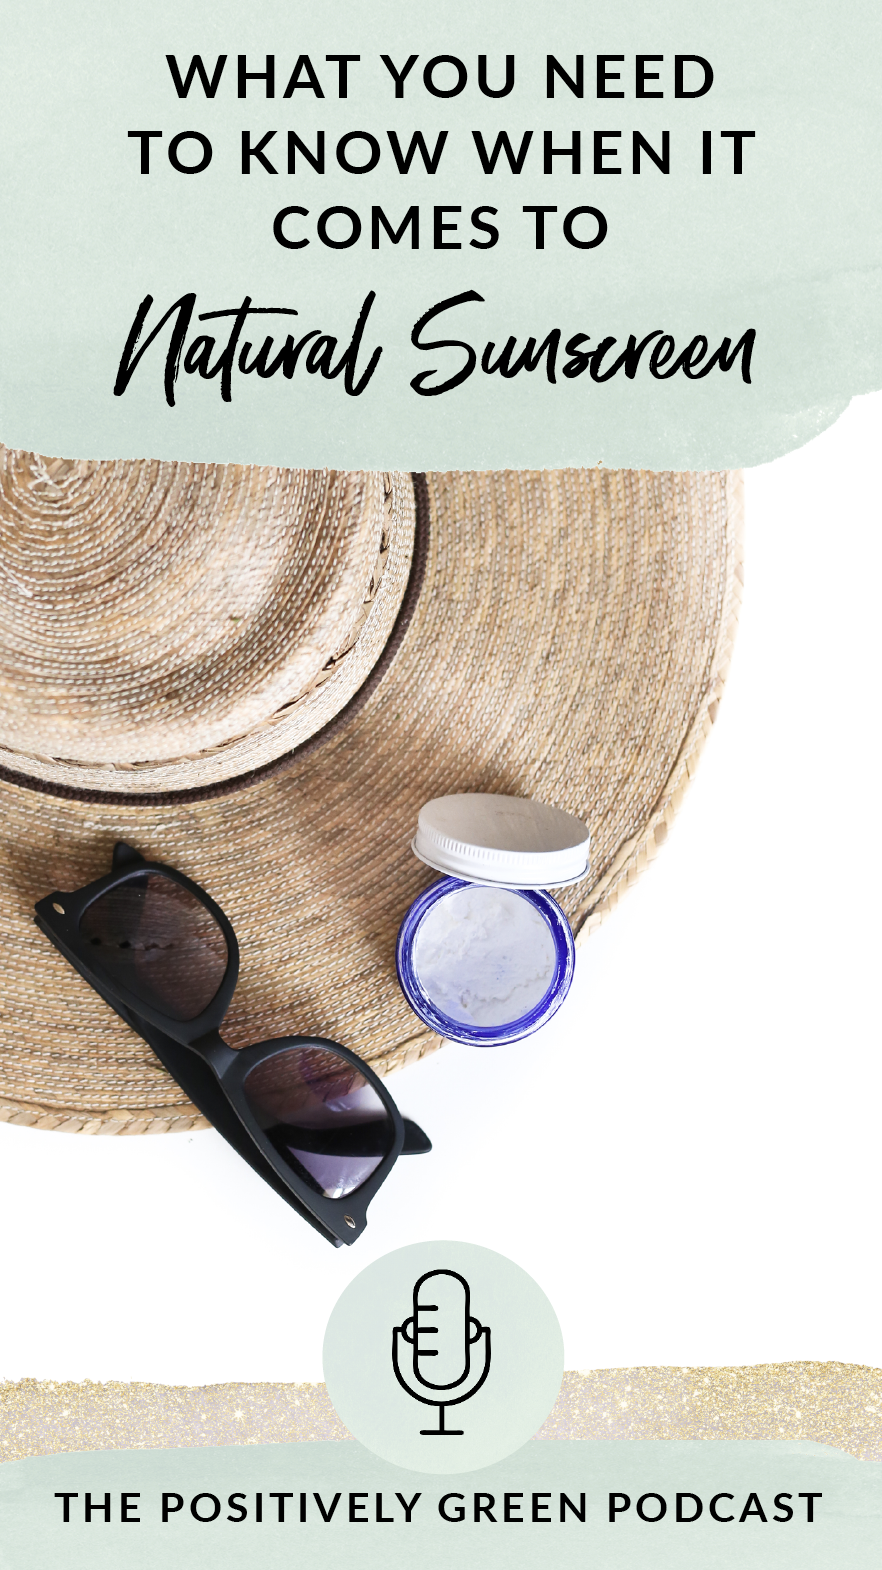 What you need to know when it comes to using natural sunscreen - The Positively Green Podcast